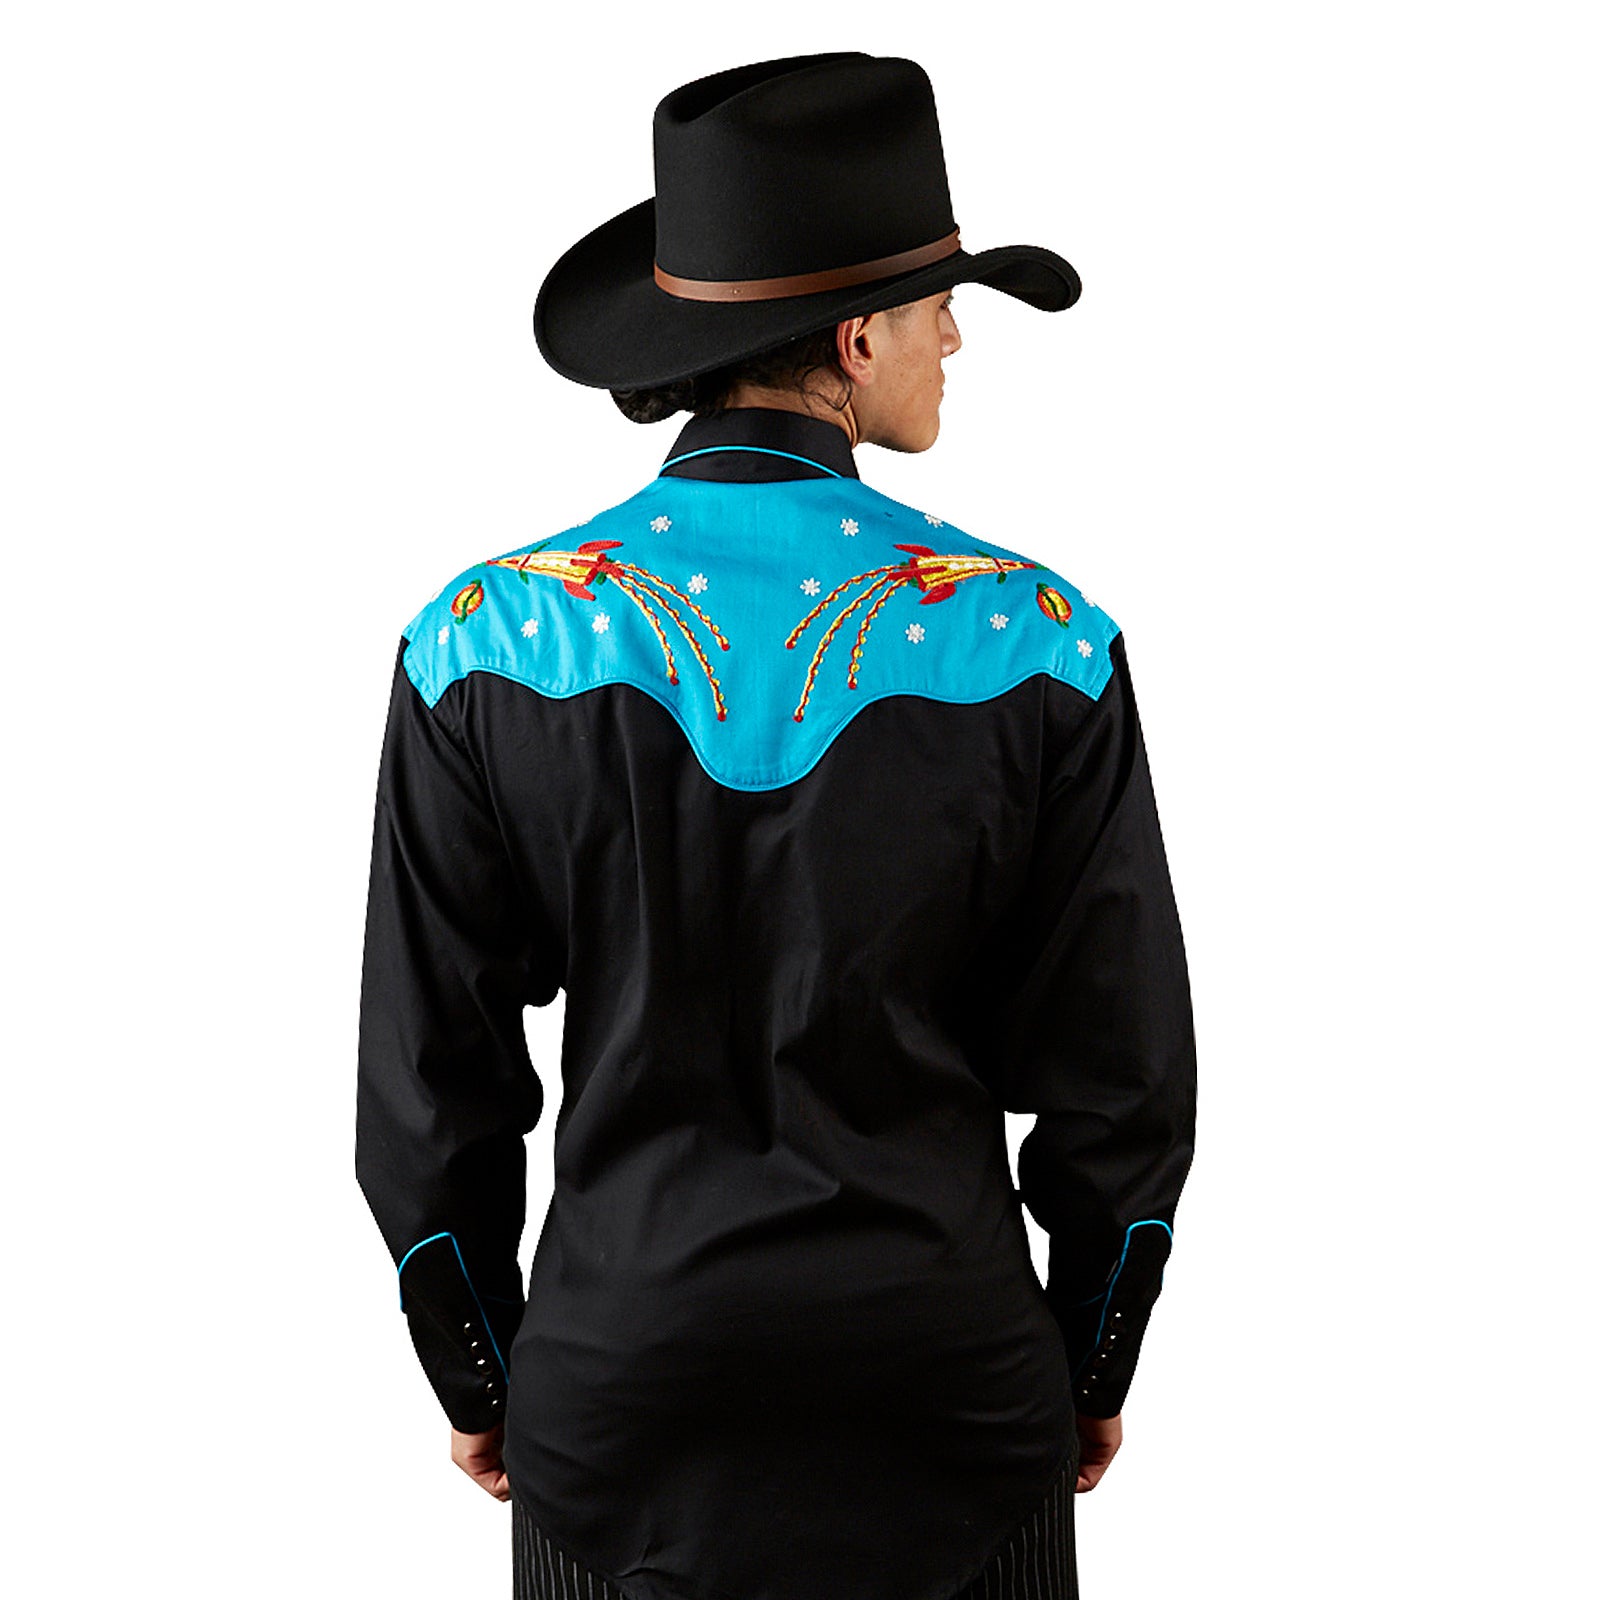 Rockmount Men's 2-Tone Space Cowboy Embroidered Western Shirt